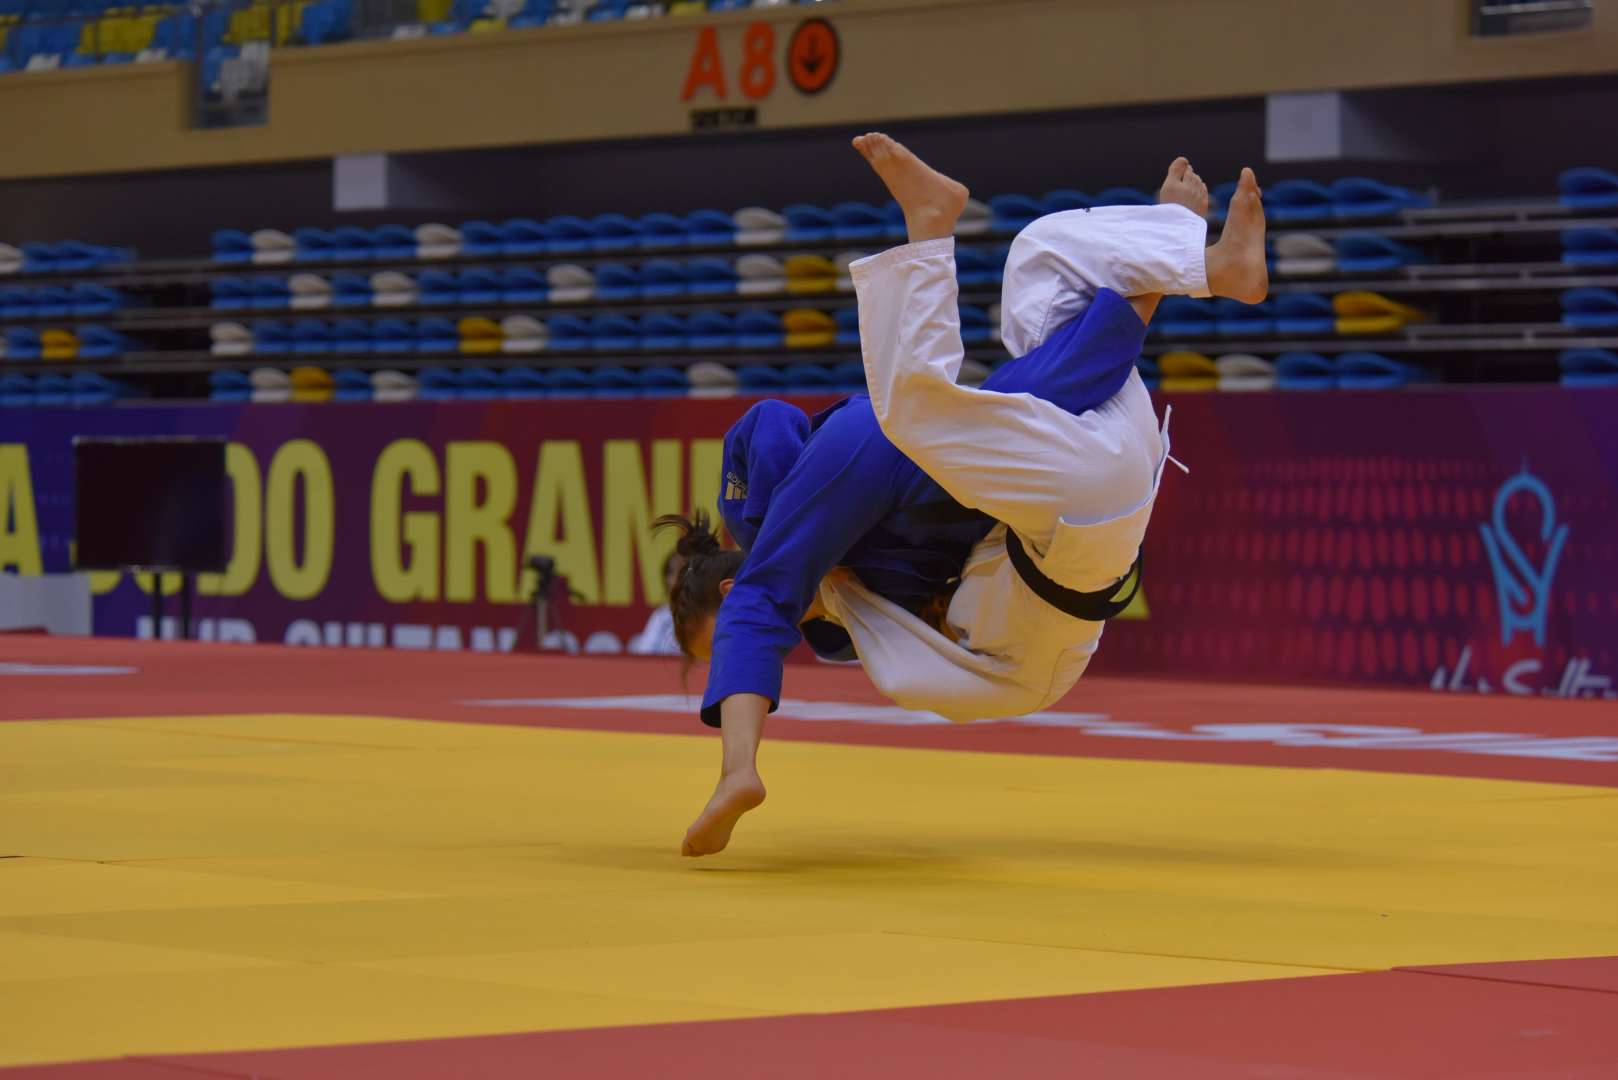 India win first ever medal at the IBSA Judo Grand Prix_40.1